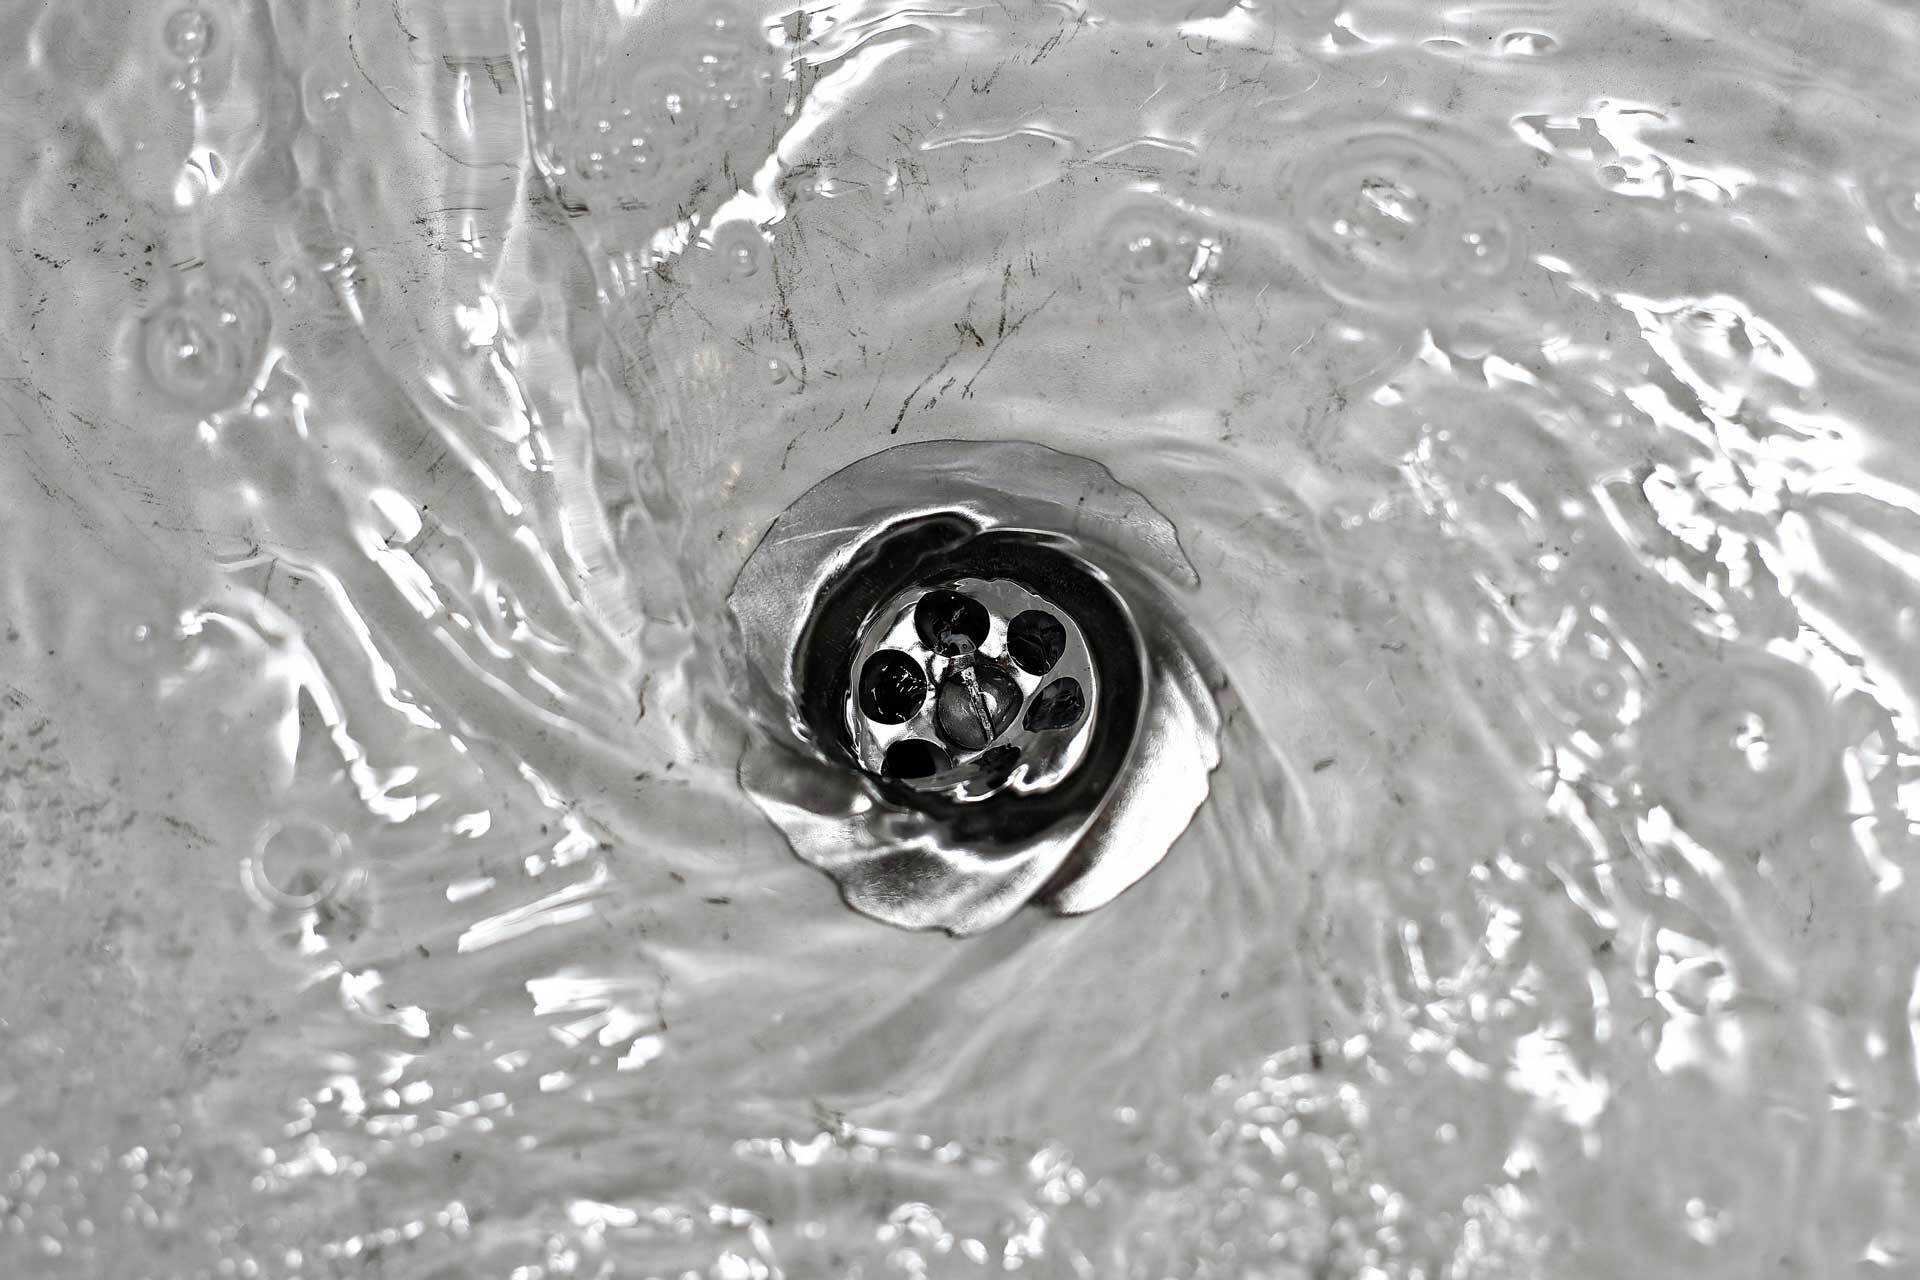 Drain Maintenance: A How-To Guide